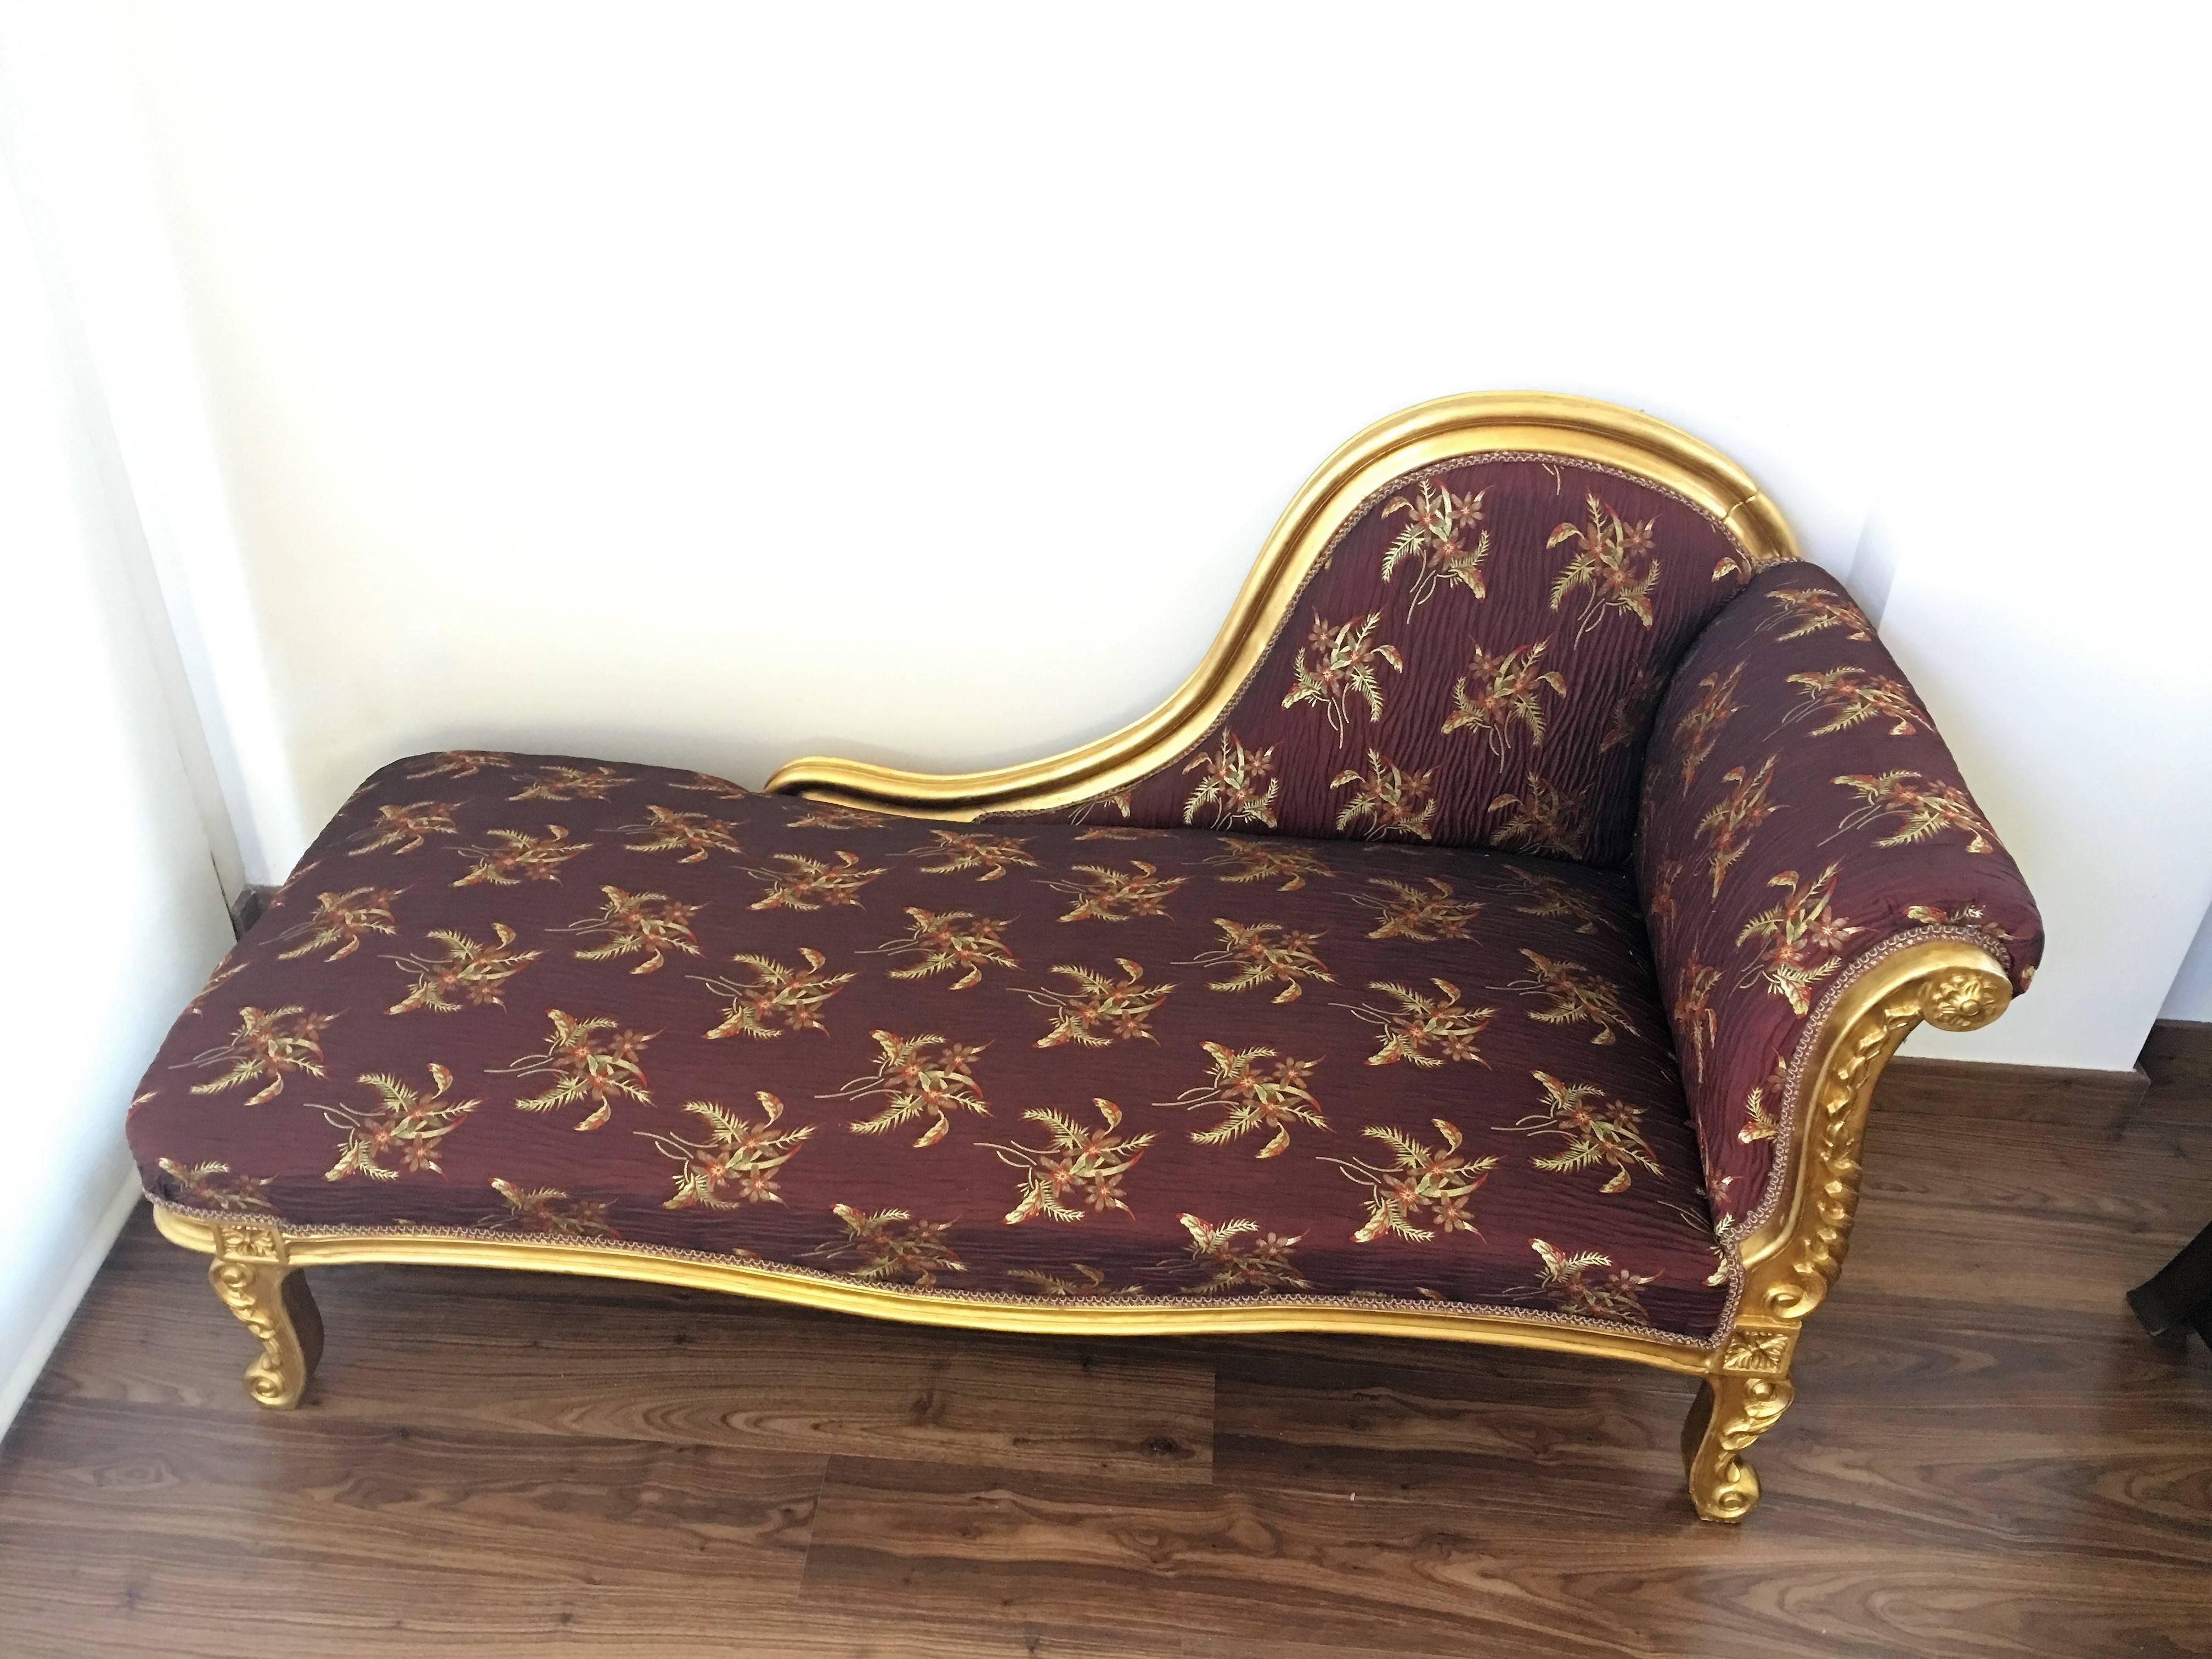 20th Century Louis XV Style Gold Lacquered Chaise Longue or Daybed